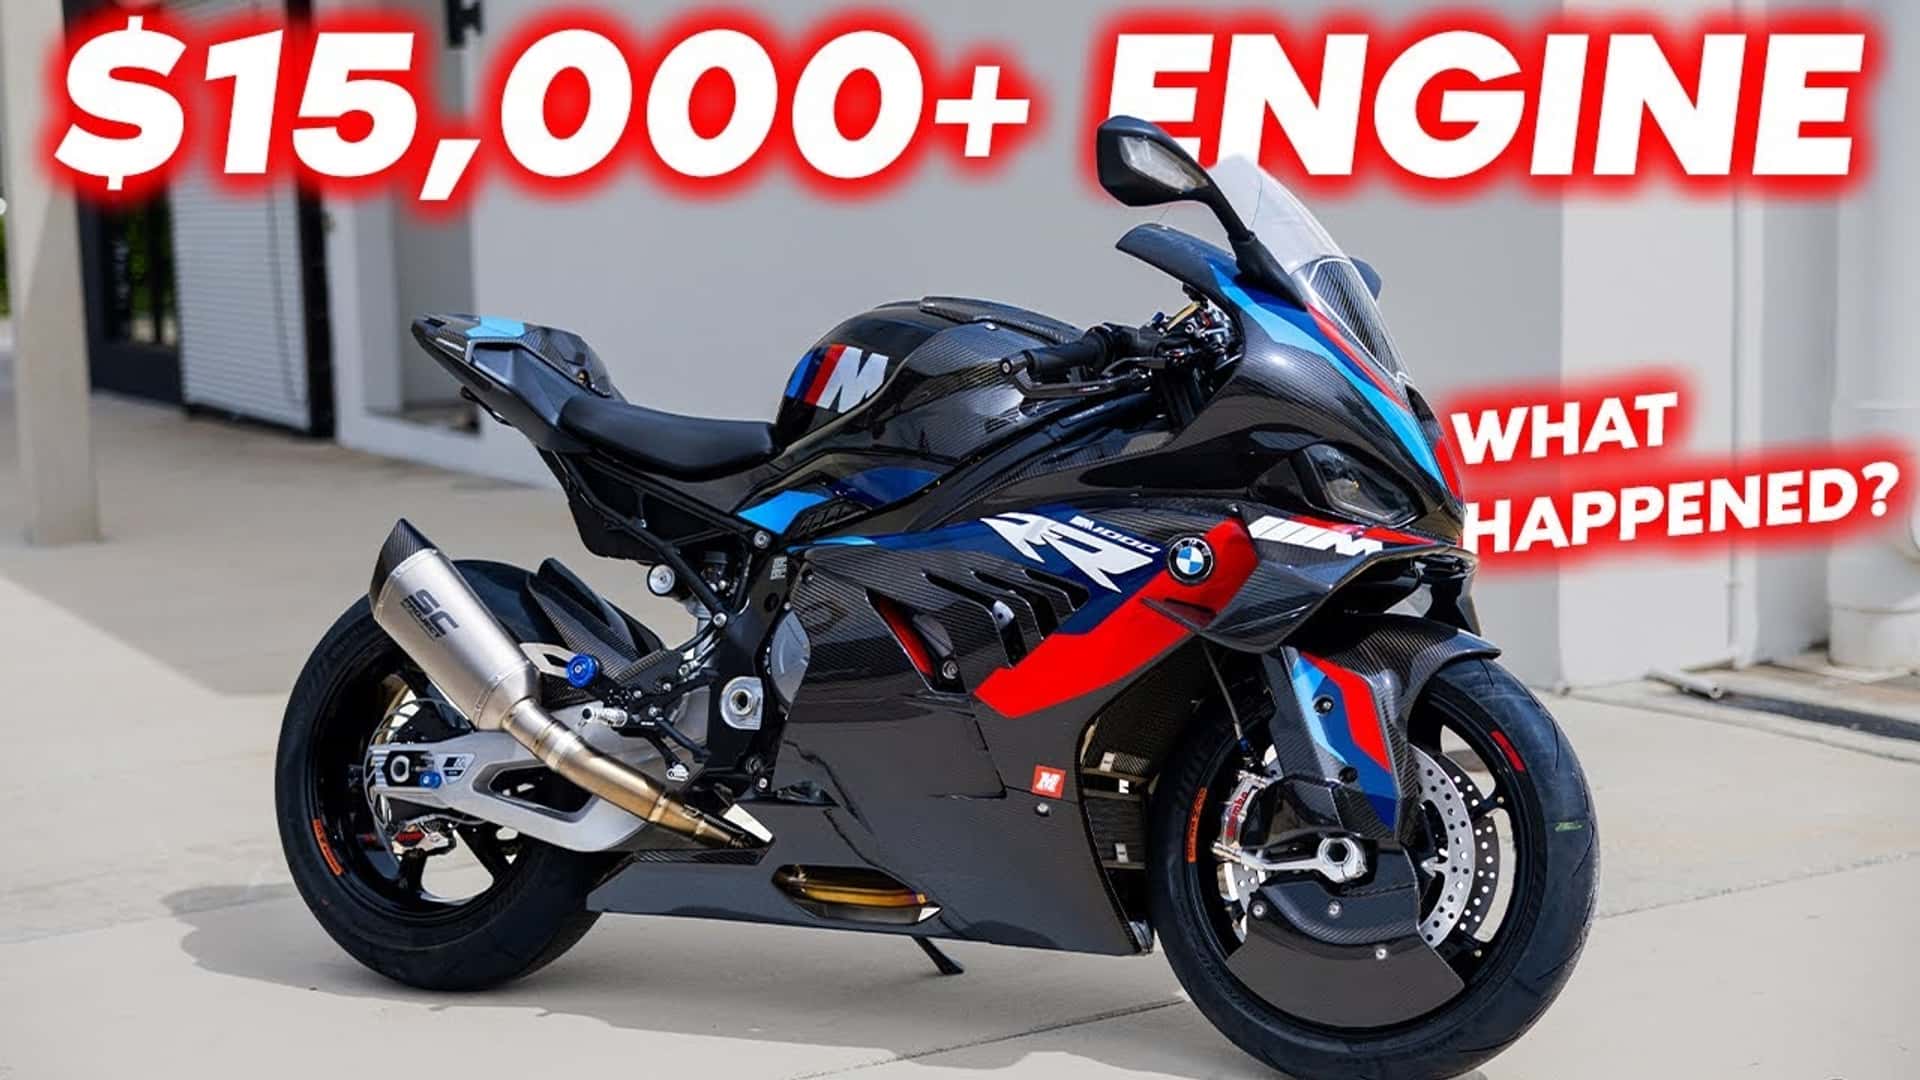 Why Did BMW Deny the Warranty On This Blown M 1000 RR Engine?